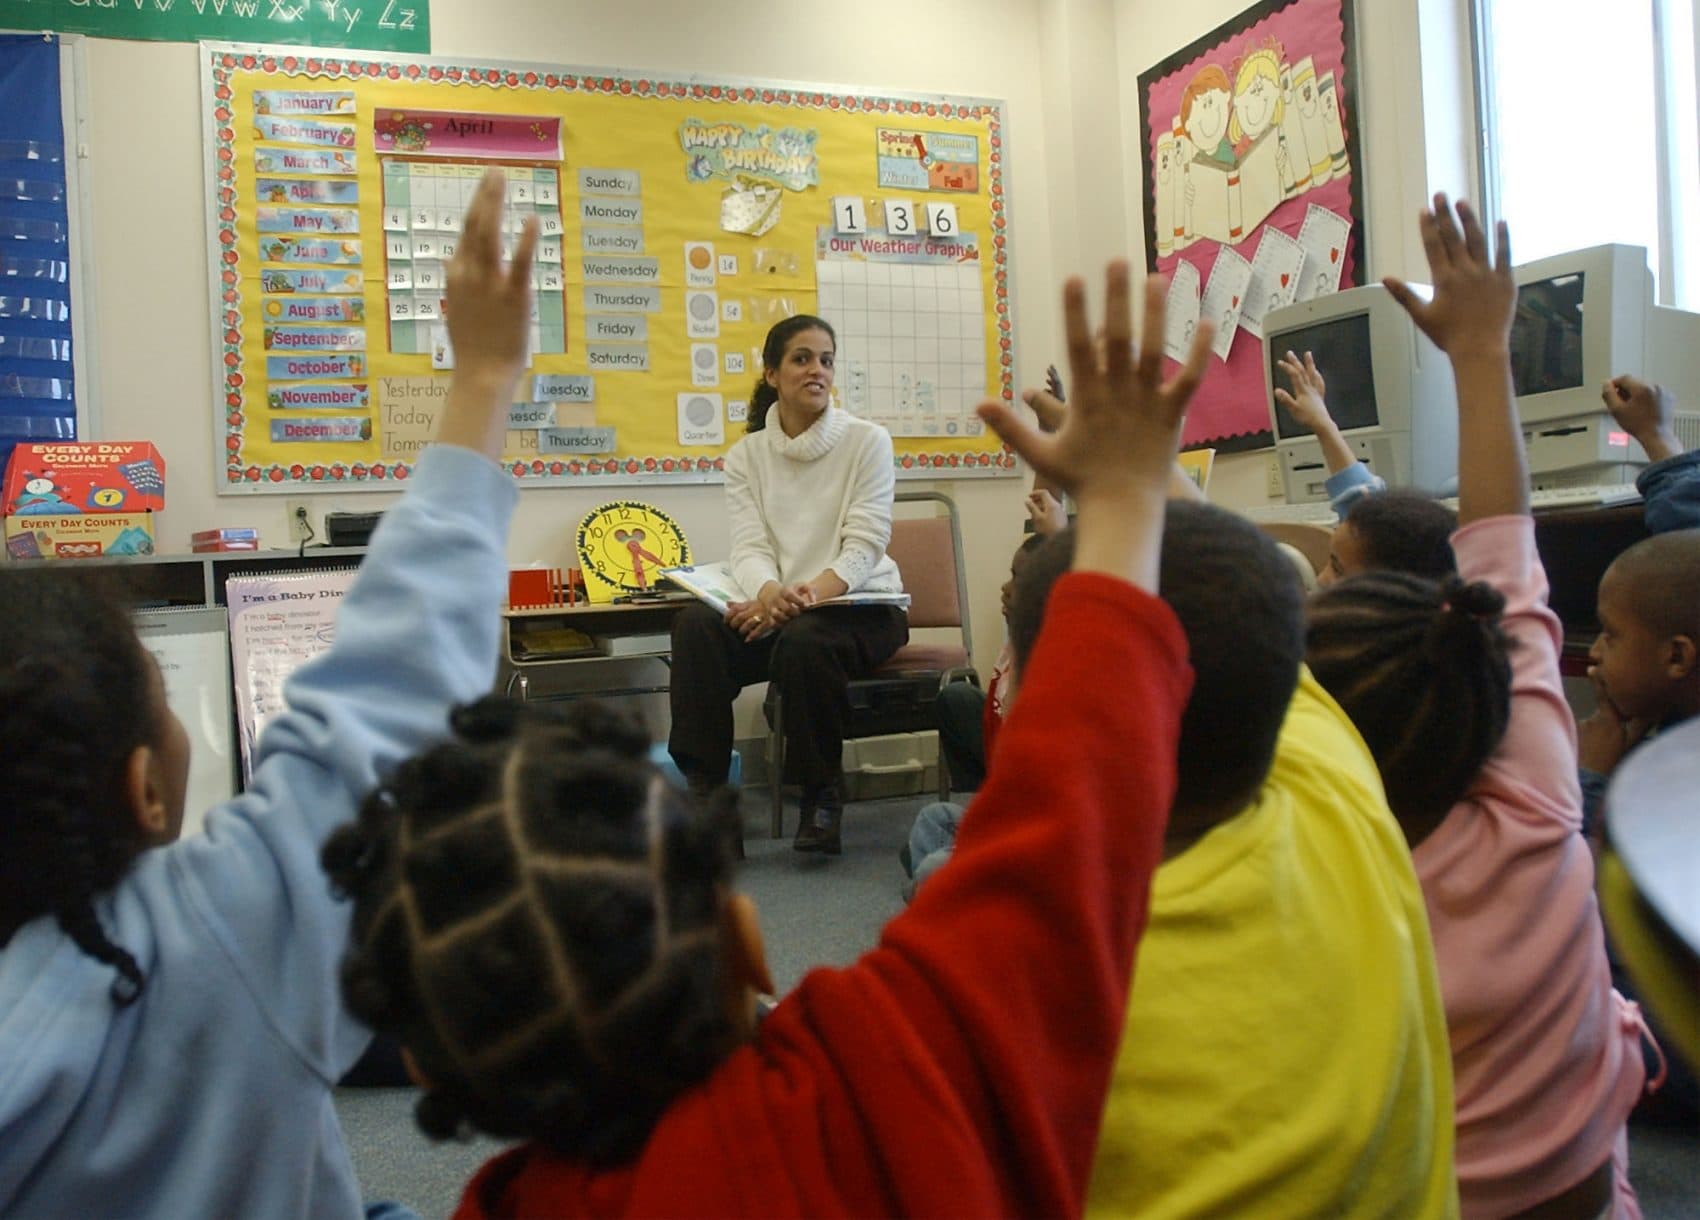 A Brockton elementary school class is seen in 2004. Years before, in the 1990s, students in Brockton and 15 other cities and towns sued the state, arguing that it was failing to provide students the opportunity to receive an "adequate education" and so was violating the Massachusetts Constitution. (Chitose Suzuki/AP)